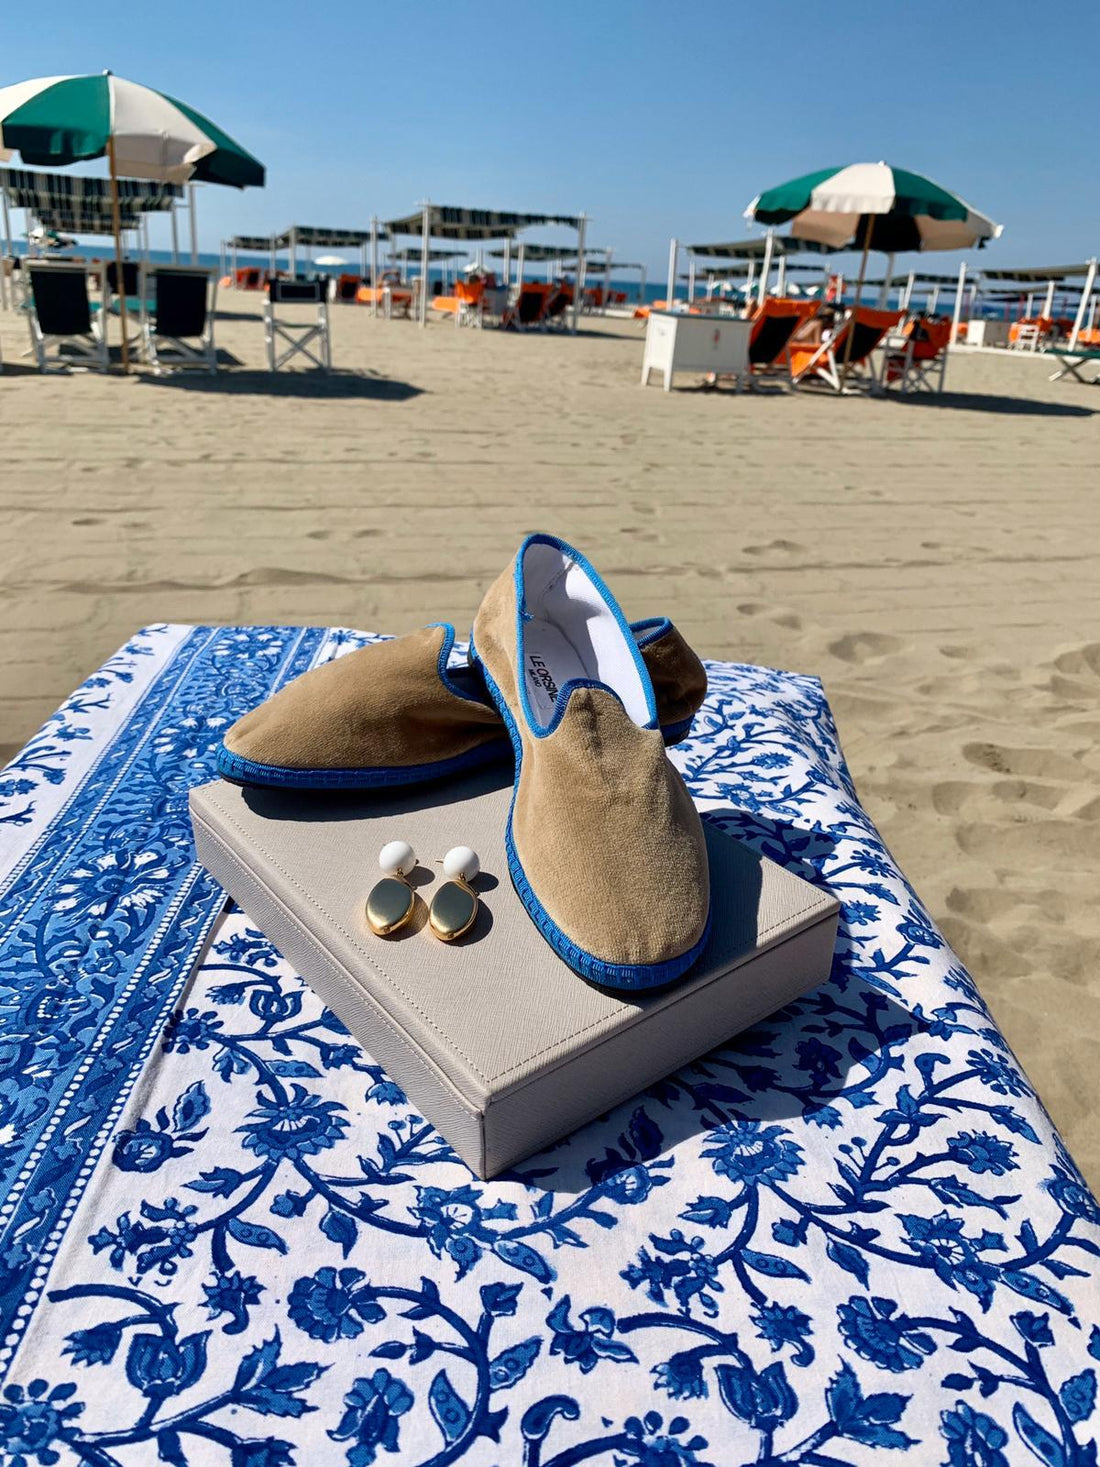 Forte Dei Marmi Edition - 1 Suitcase filled with shoes and great memories